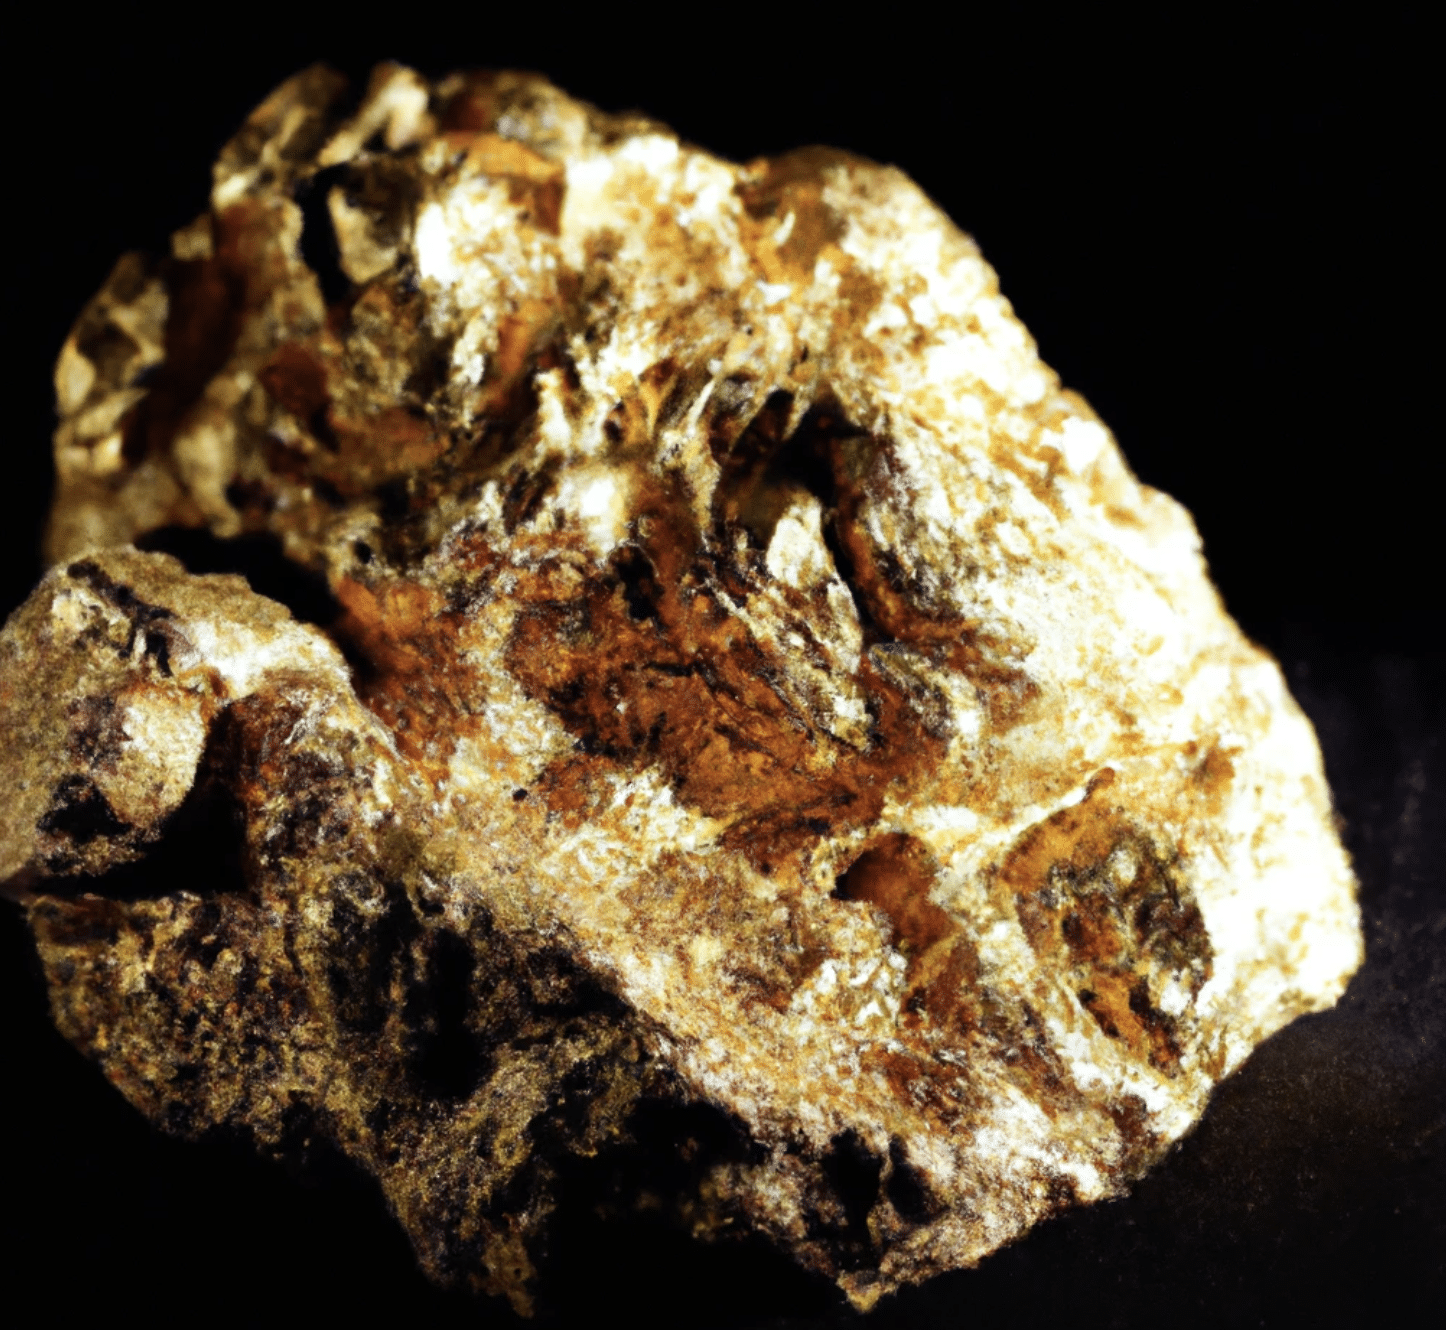 Gold Mineral